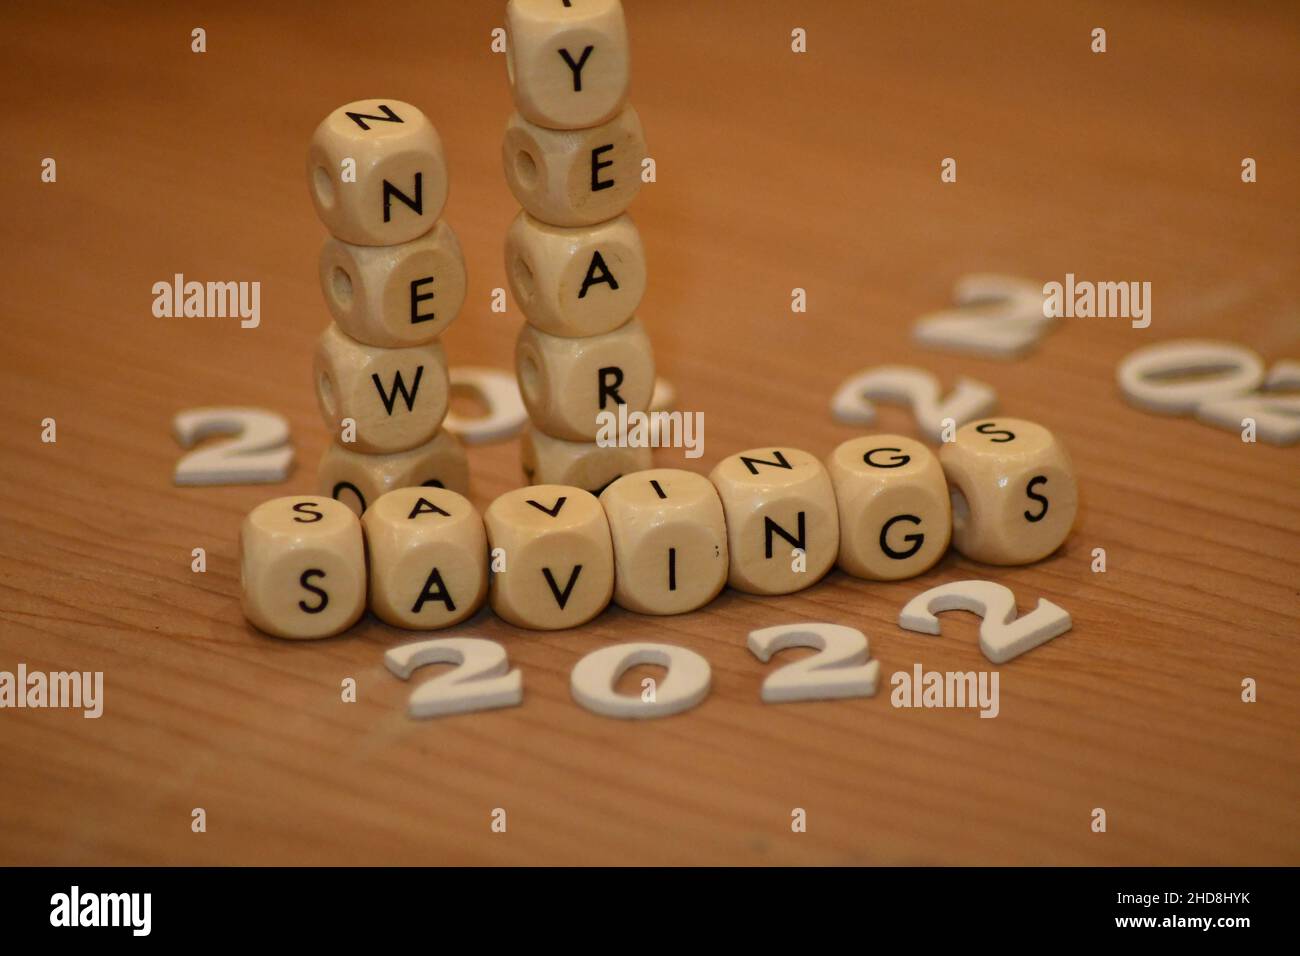 Lettered blocks spelling out New Year Savings 2022 Stock Photo